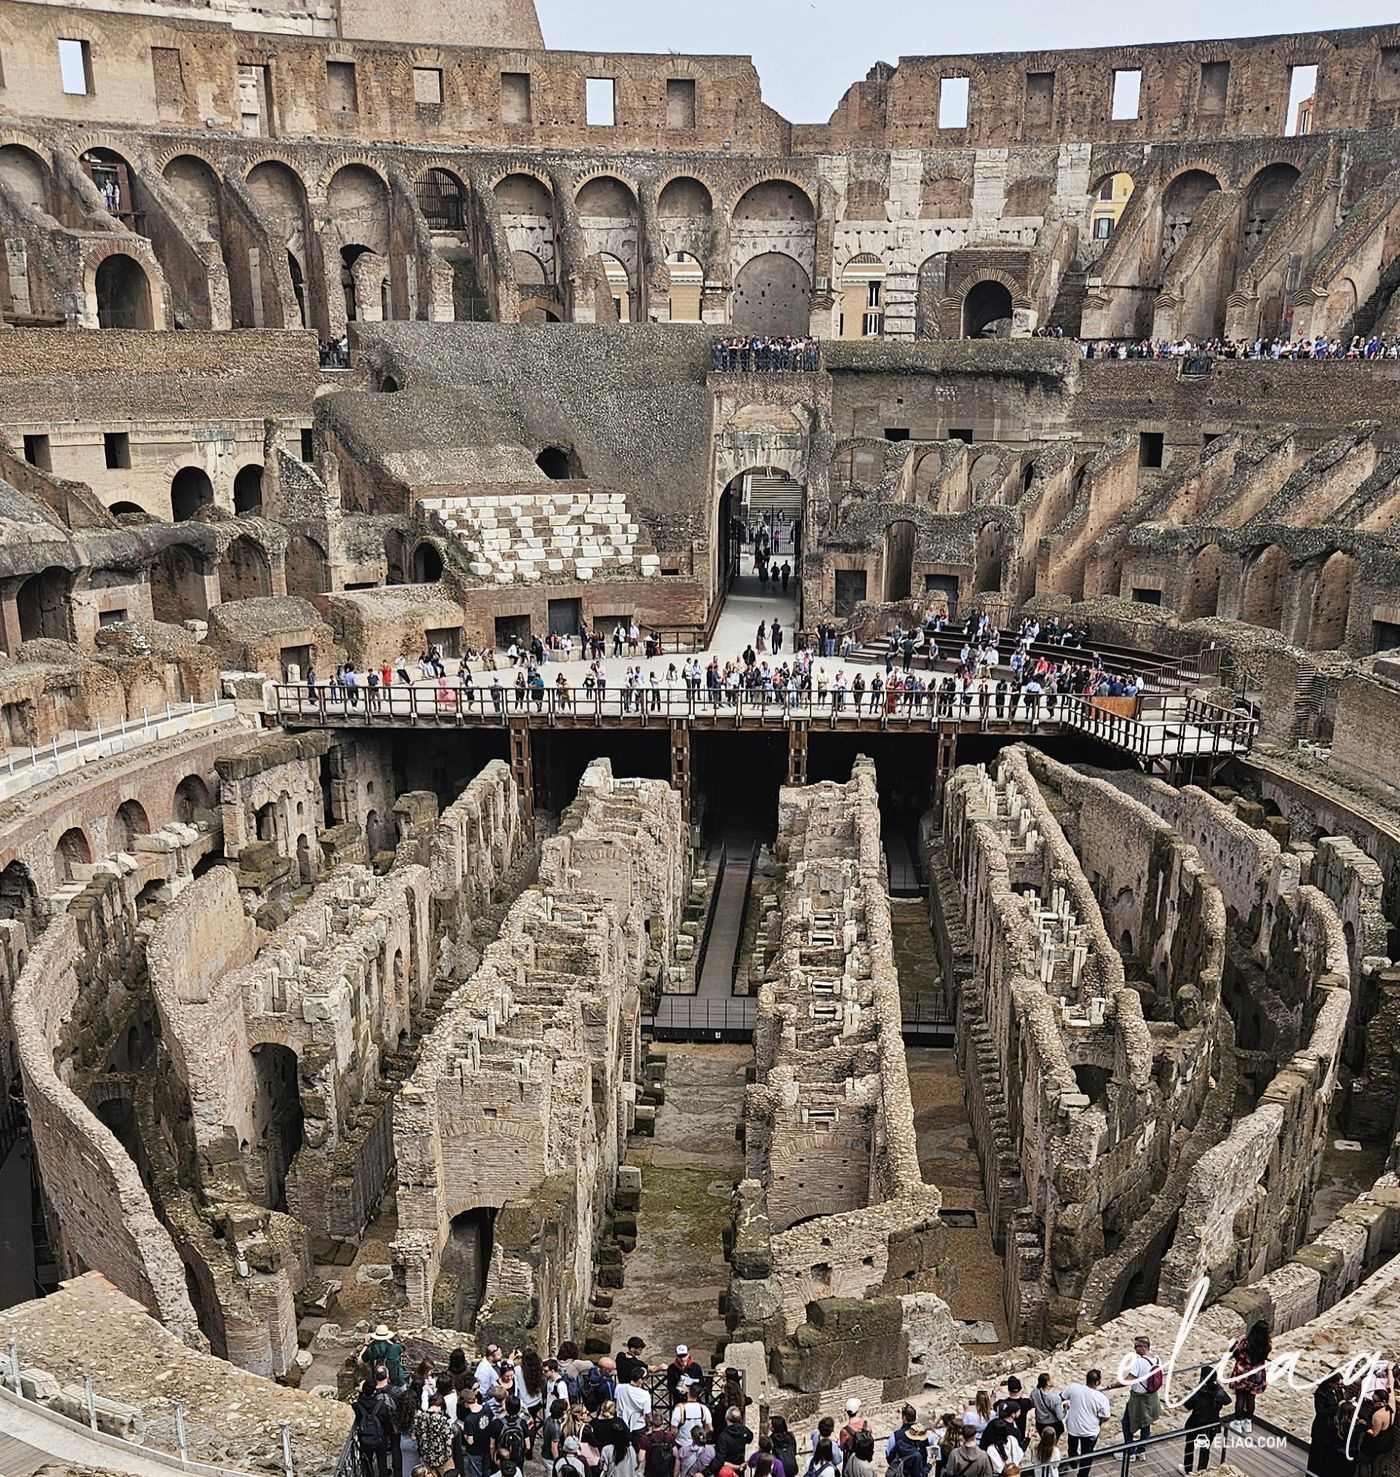 shocking revelations from the colosseum!